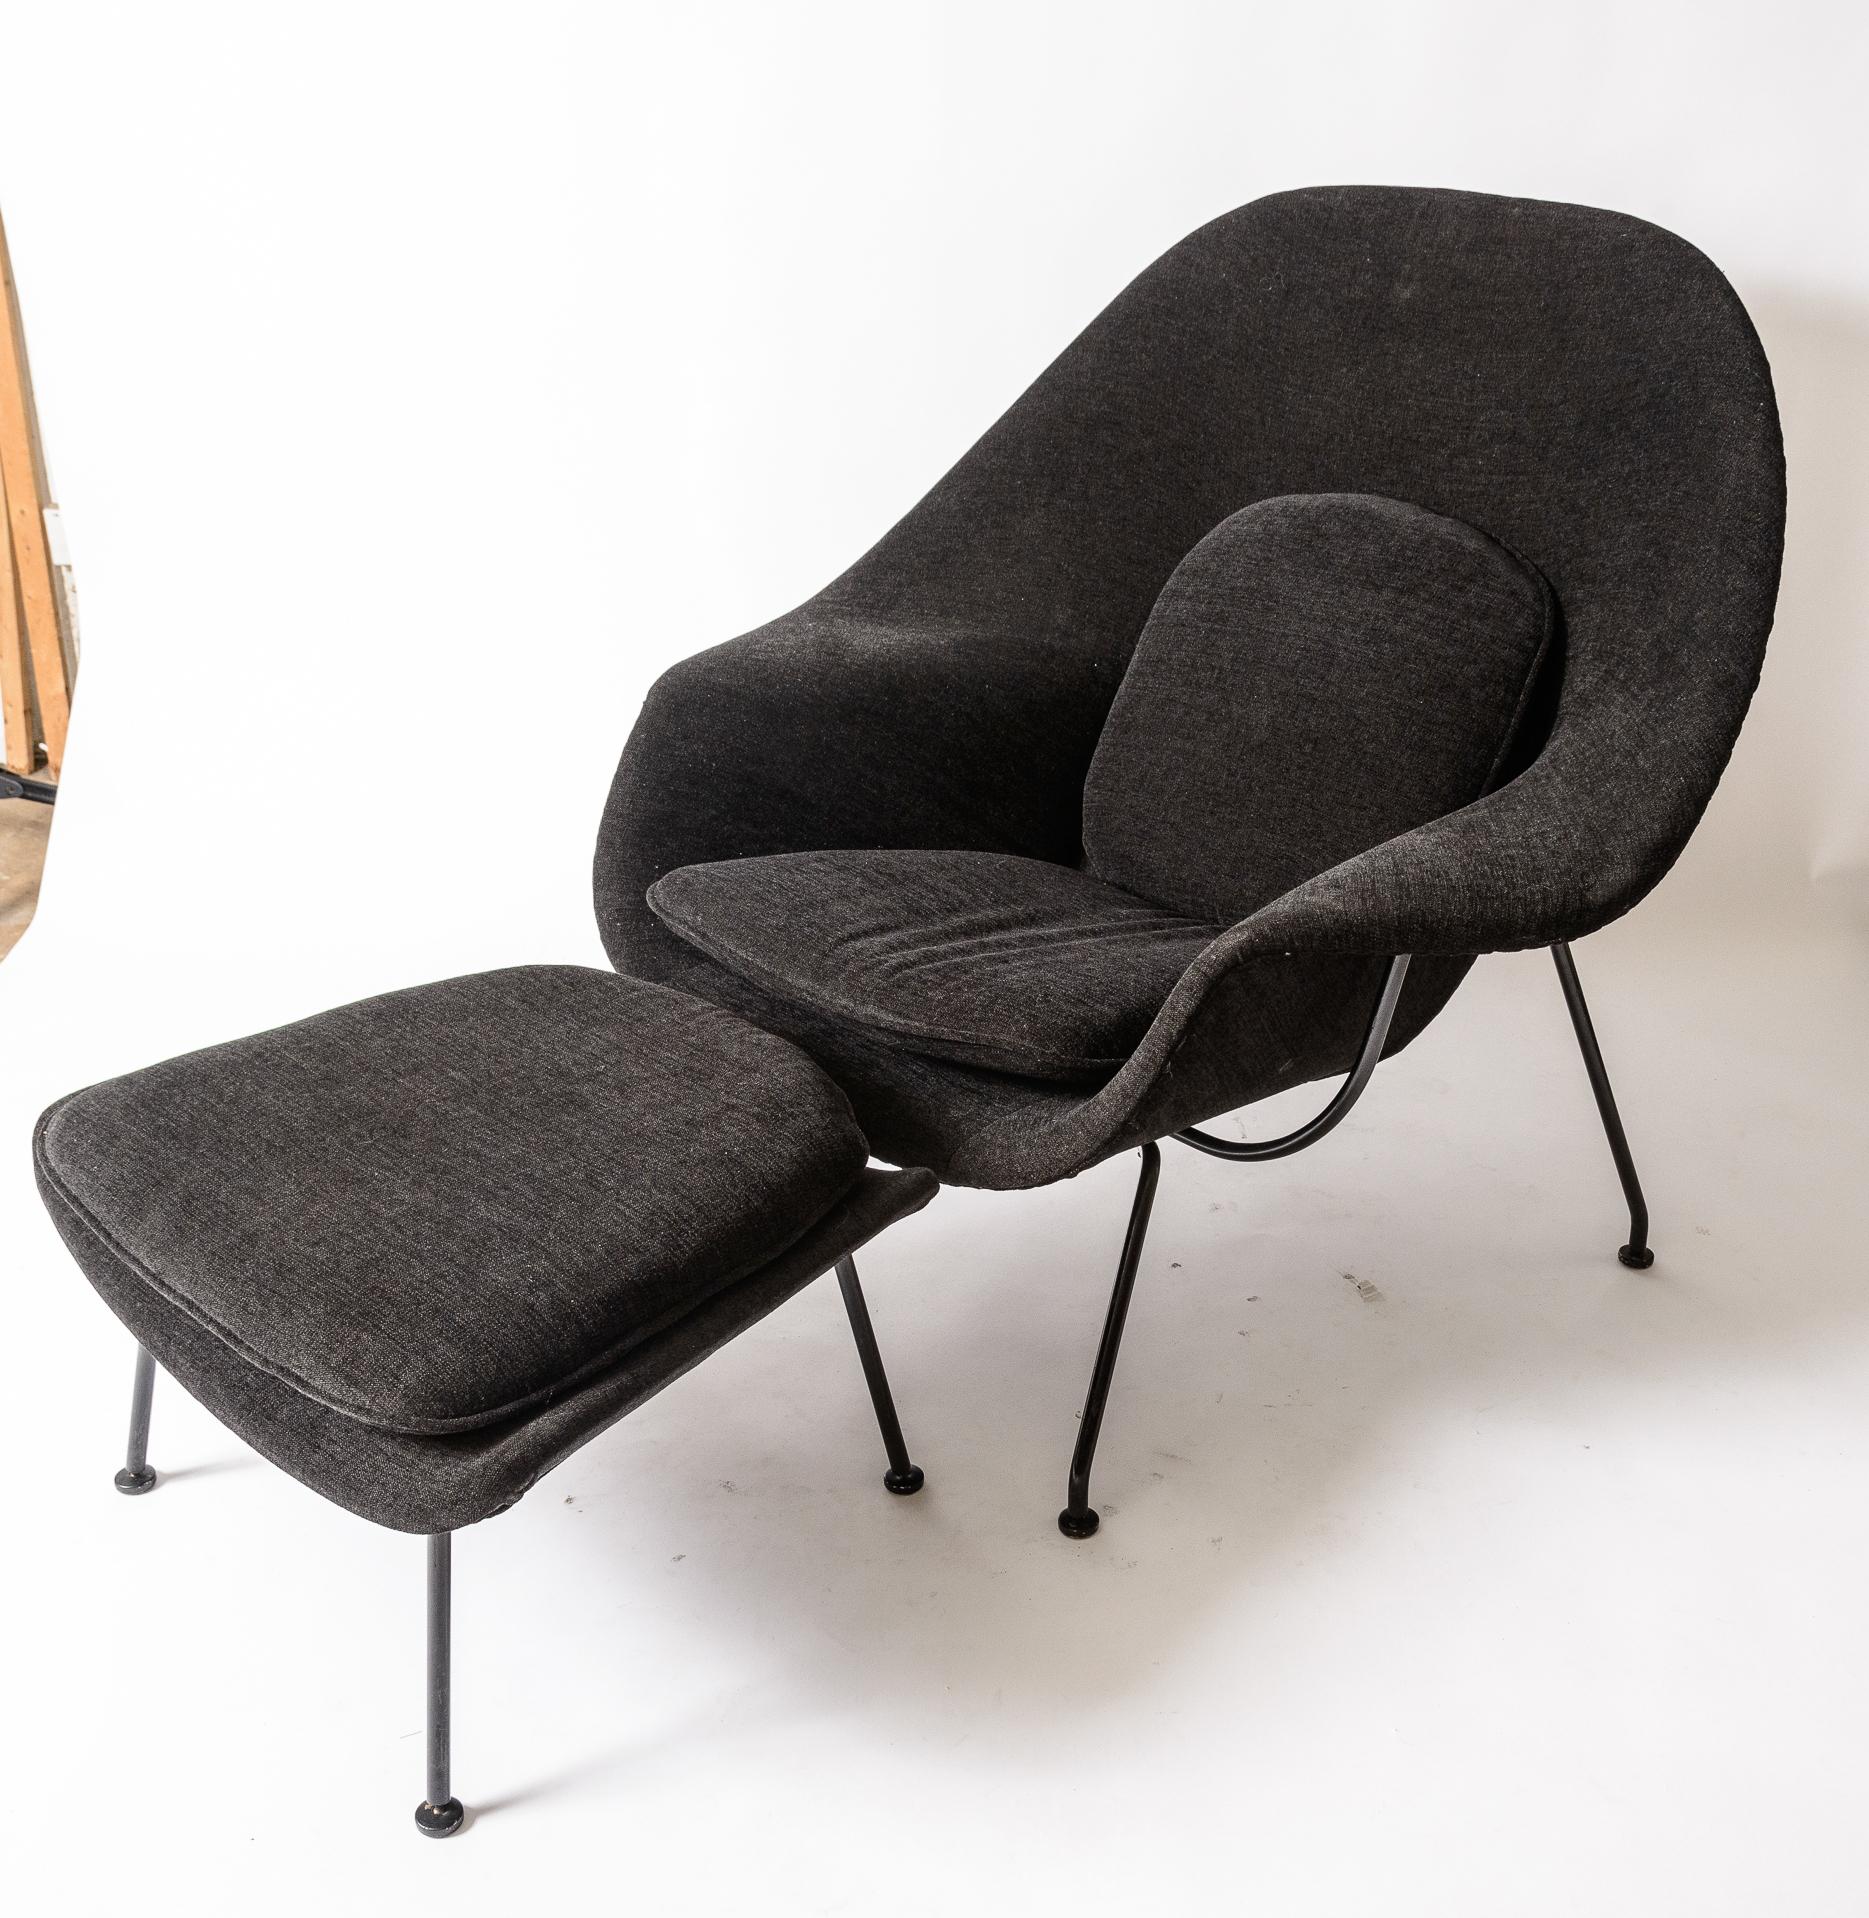 Eero Saarinen Womb Chair and Ottoman
Late 1960s production by Knoll
 Re-Upholstered
Original Black Enamel Frame
Color of the fabric is black with gray undertones, the 
last photo ,I have place a gray and black t-shirt against the cushion